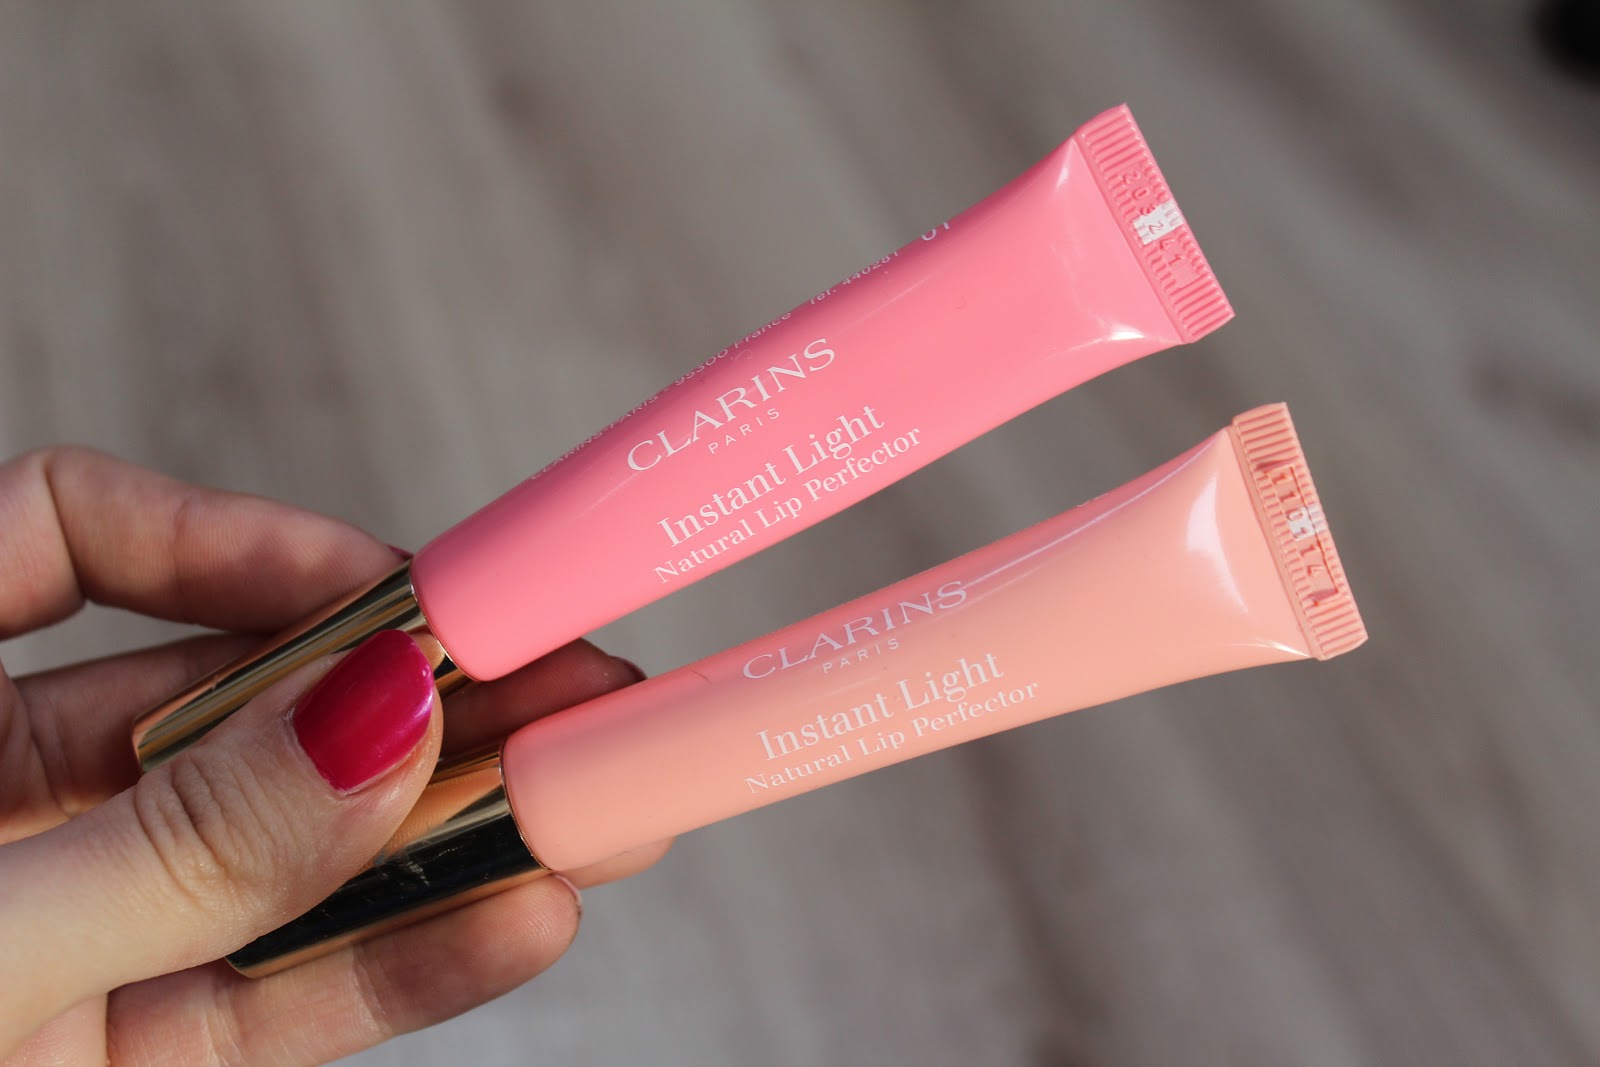 Tradition Ray ar CLARINS INSTANT LIGHT NATURAL LIP PERFECTOR – Lily Pebbles